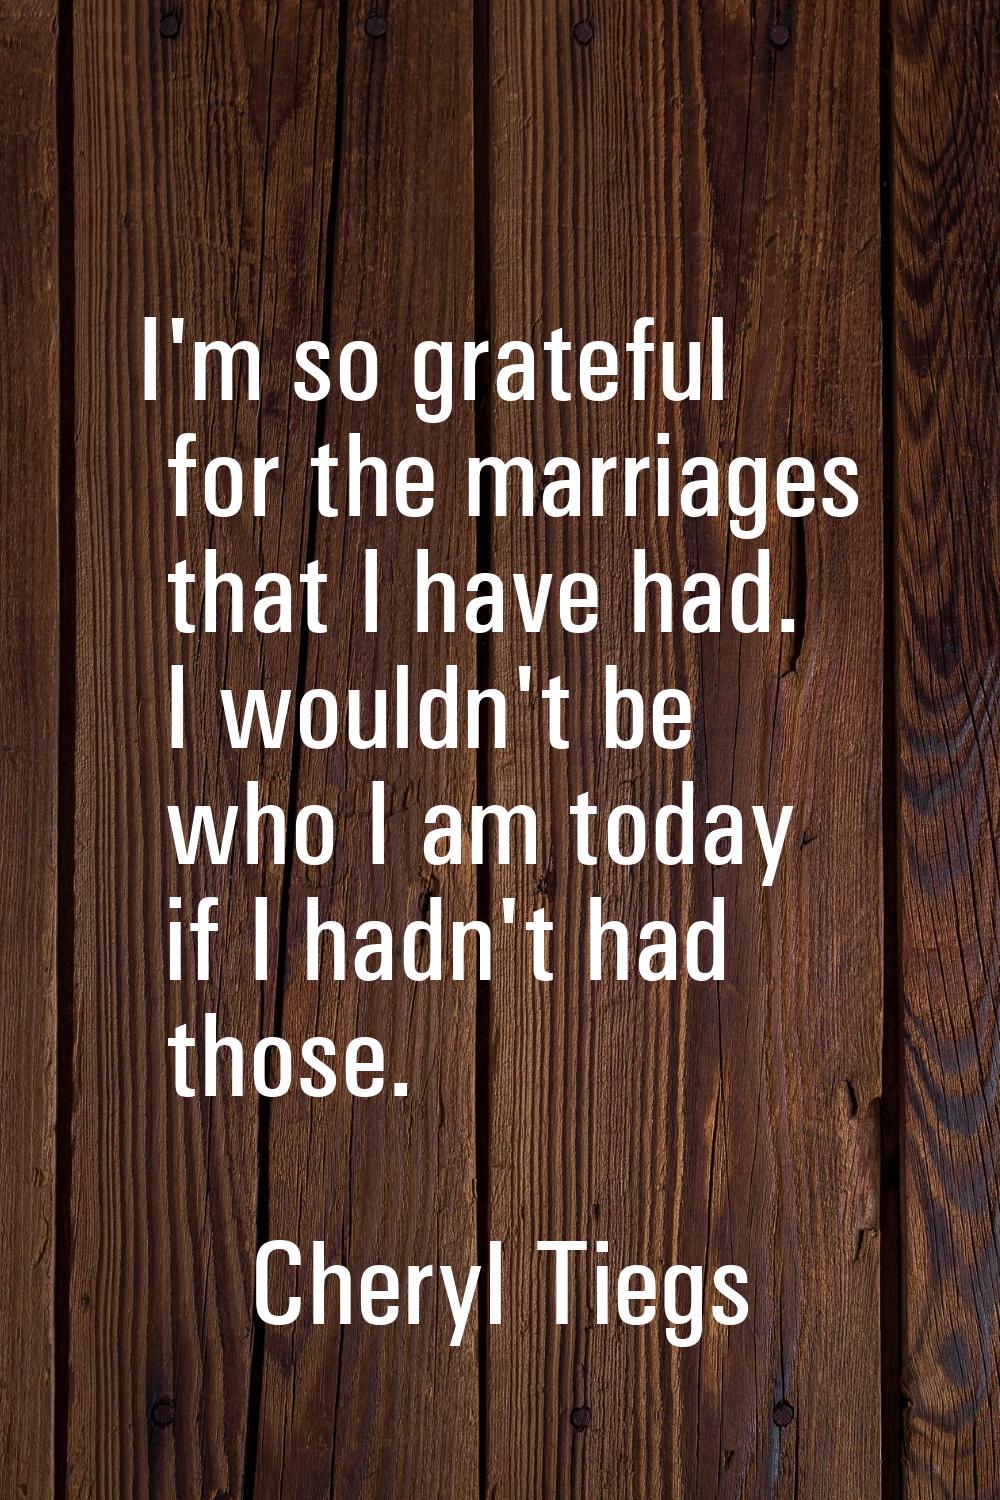 I'm so grateful for the marriages that I have had. I wouldn't be who I am today if I hadn't had tho